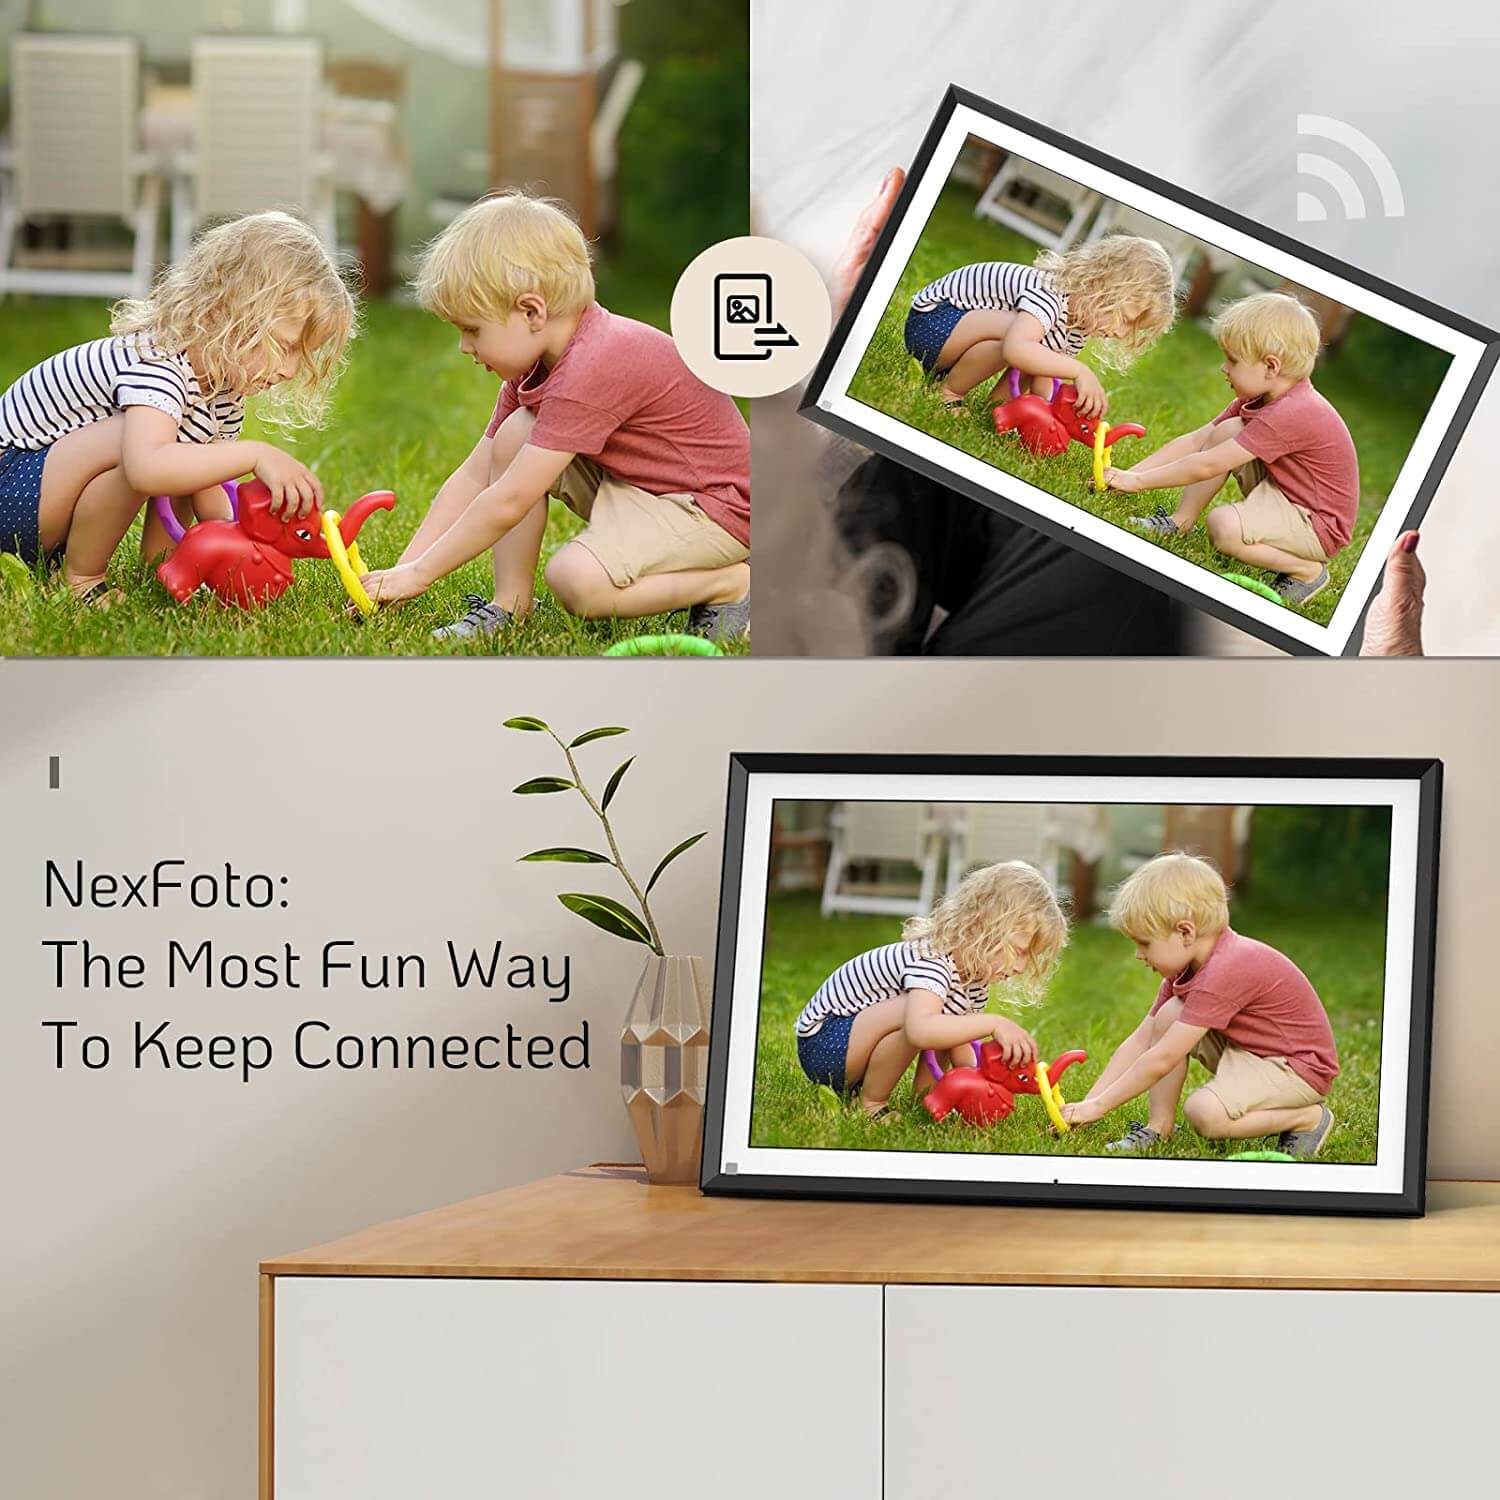 Pix-Star 15 inch WiFi Digital Picture Frame, Share Videos and Photos Instantly by Email or App, Motion Sensor, IPS Display, Effortless One Minute Setu - 2